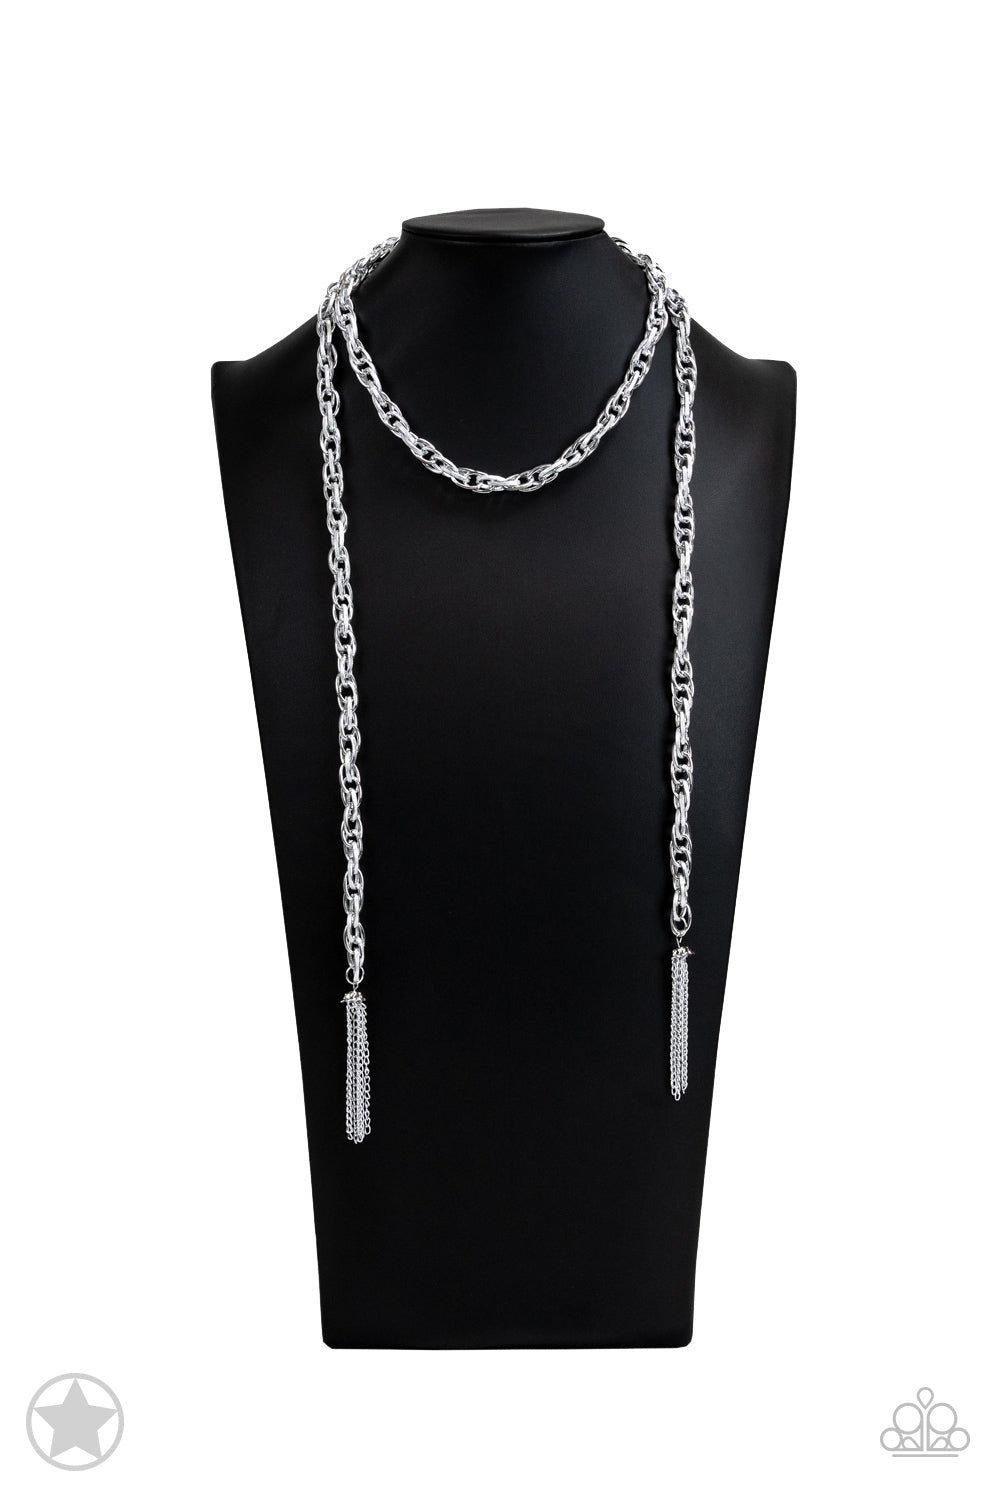 SCARFed for Attention - Silver Necklace - Paparazzi Accessories - the scarf necklace features FIVE different ways to accessorize: Open Layer, Loop, Traditional Wrap, Double Knot, and Nautical Knot. Bejeweled Accessories By Kristie - Trendy fashion jewelry for everyone -